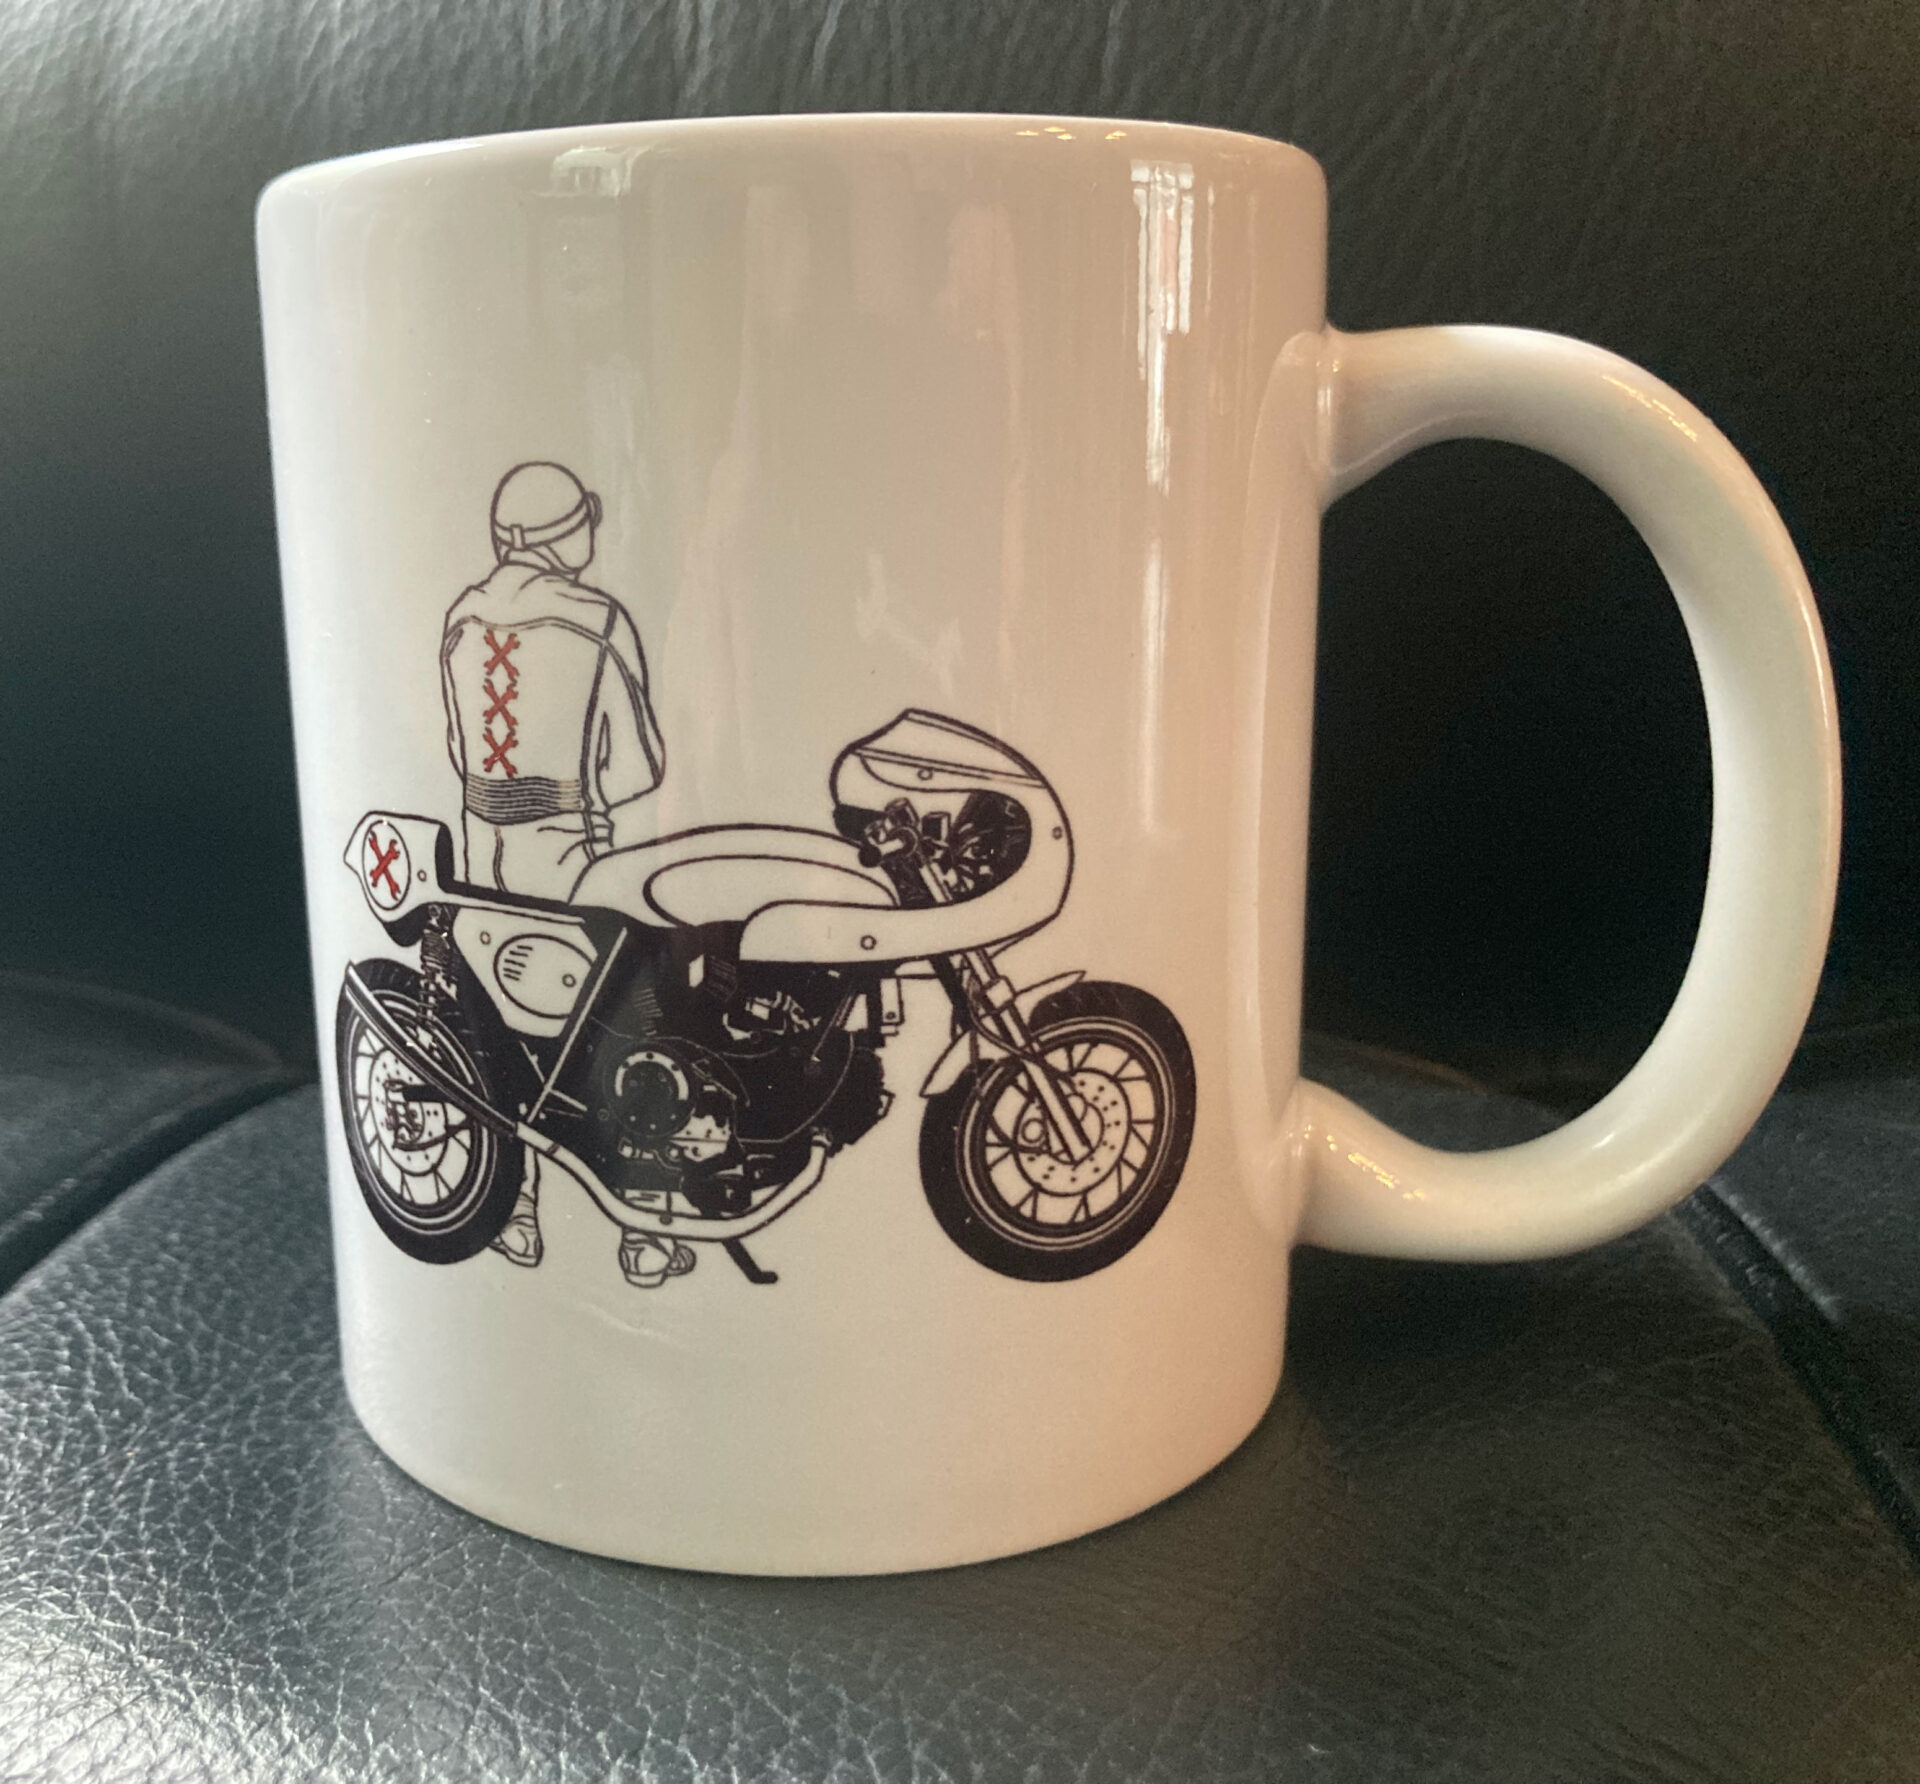 Caferacer Mug – make your cup of coffee taste even better